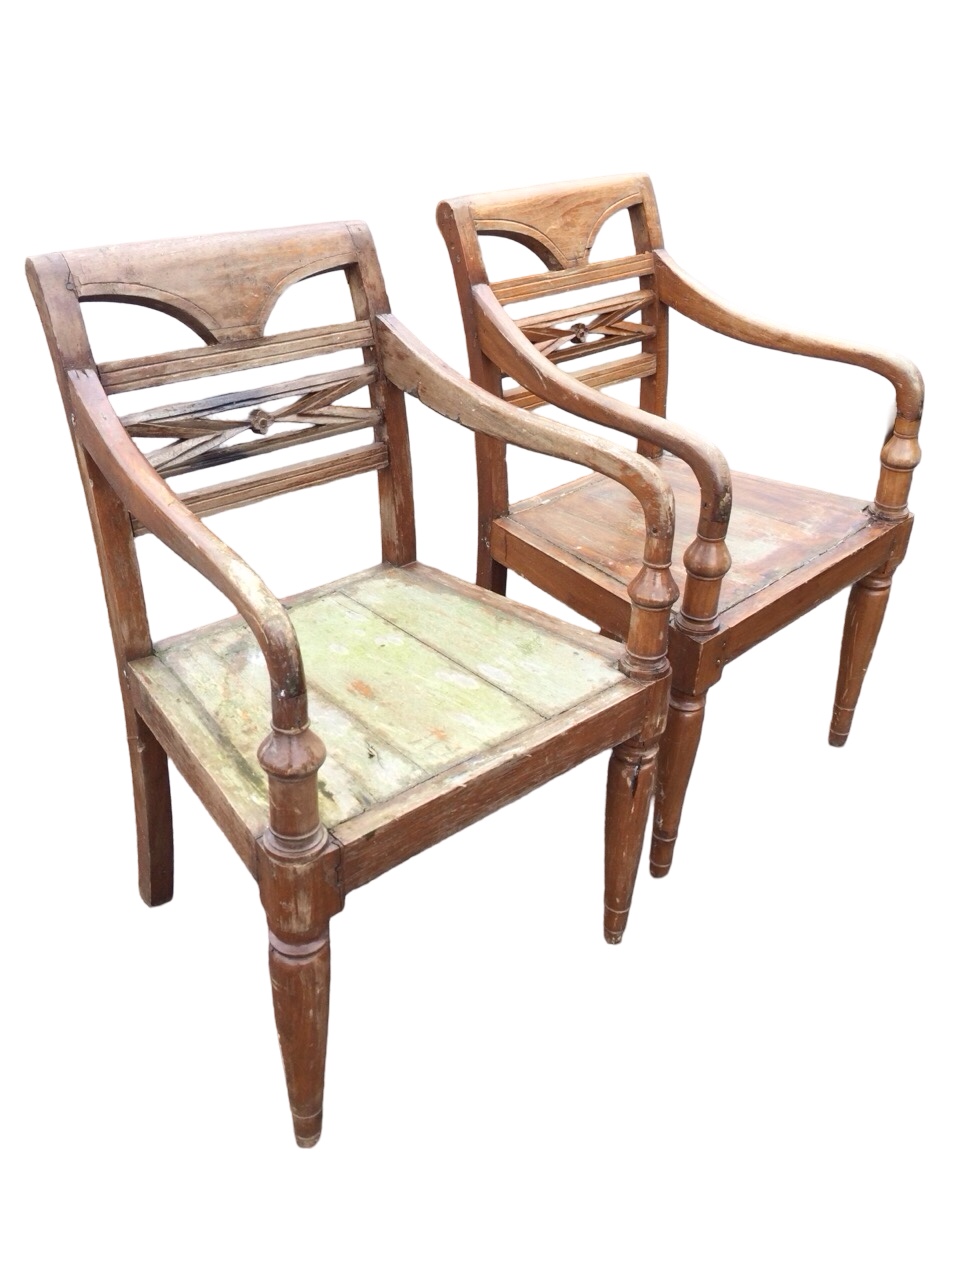 A pair of hardwood armchairs with shaped arms on columns, the backs with carved rails, the solid